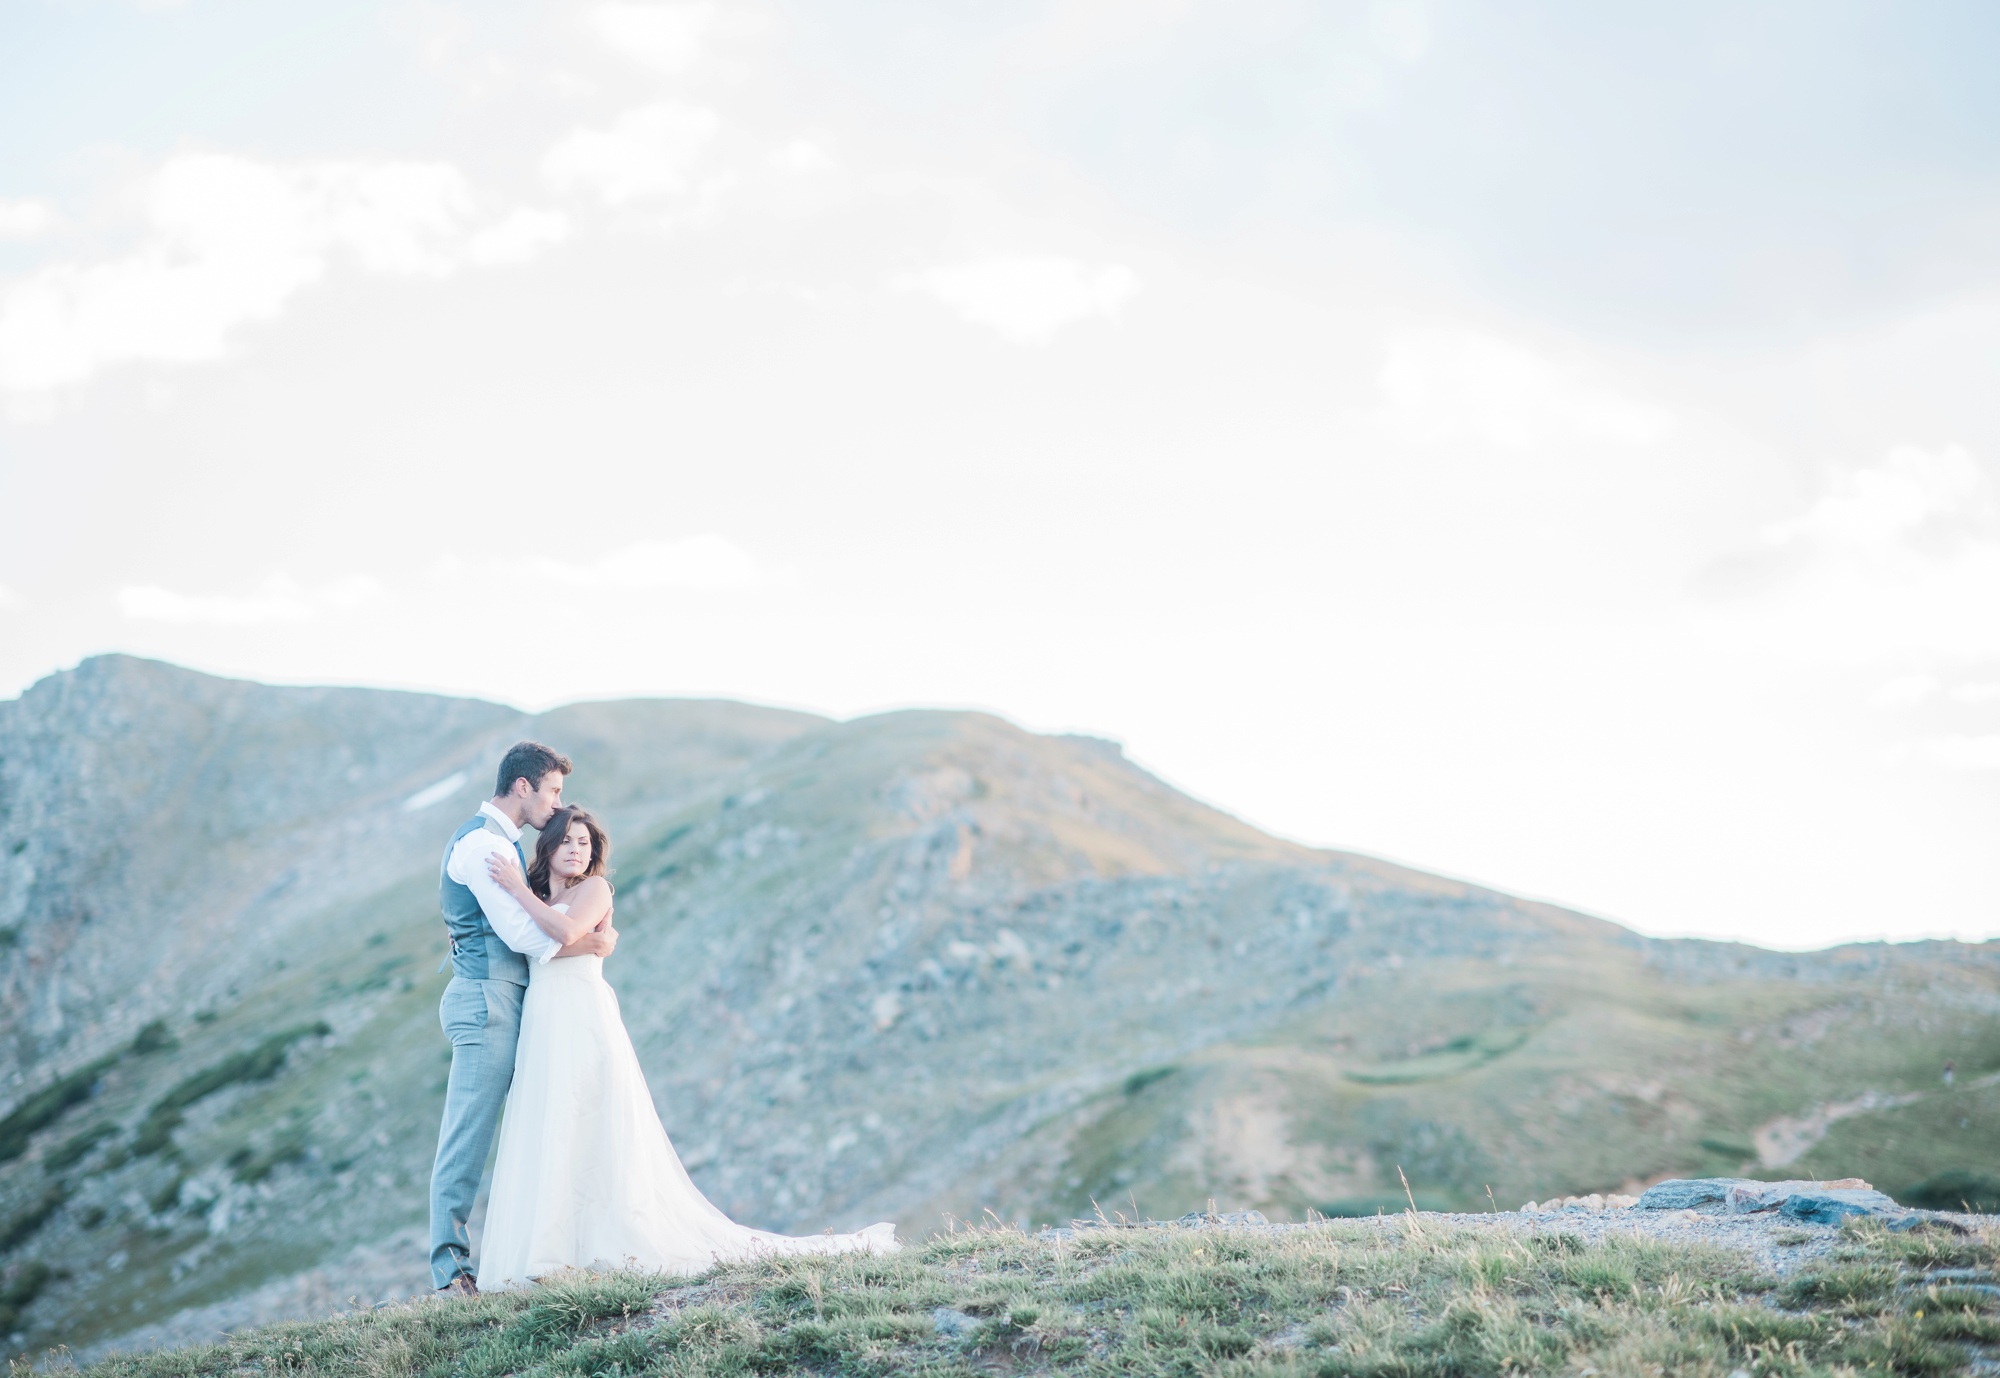 Dreaming of their future together on top of Loveland Pass 